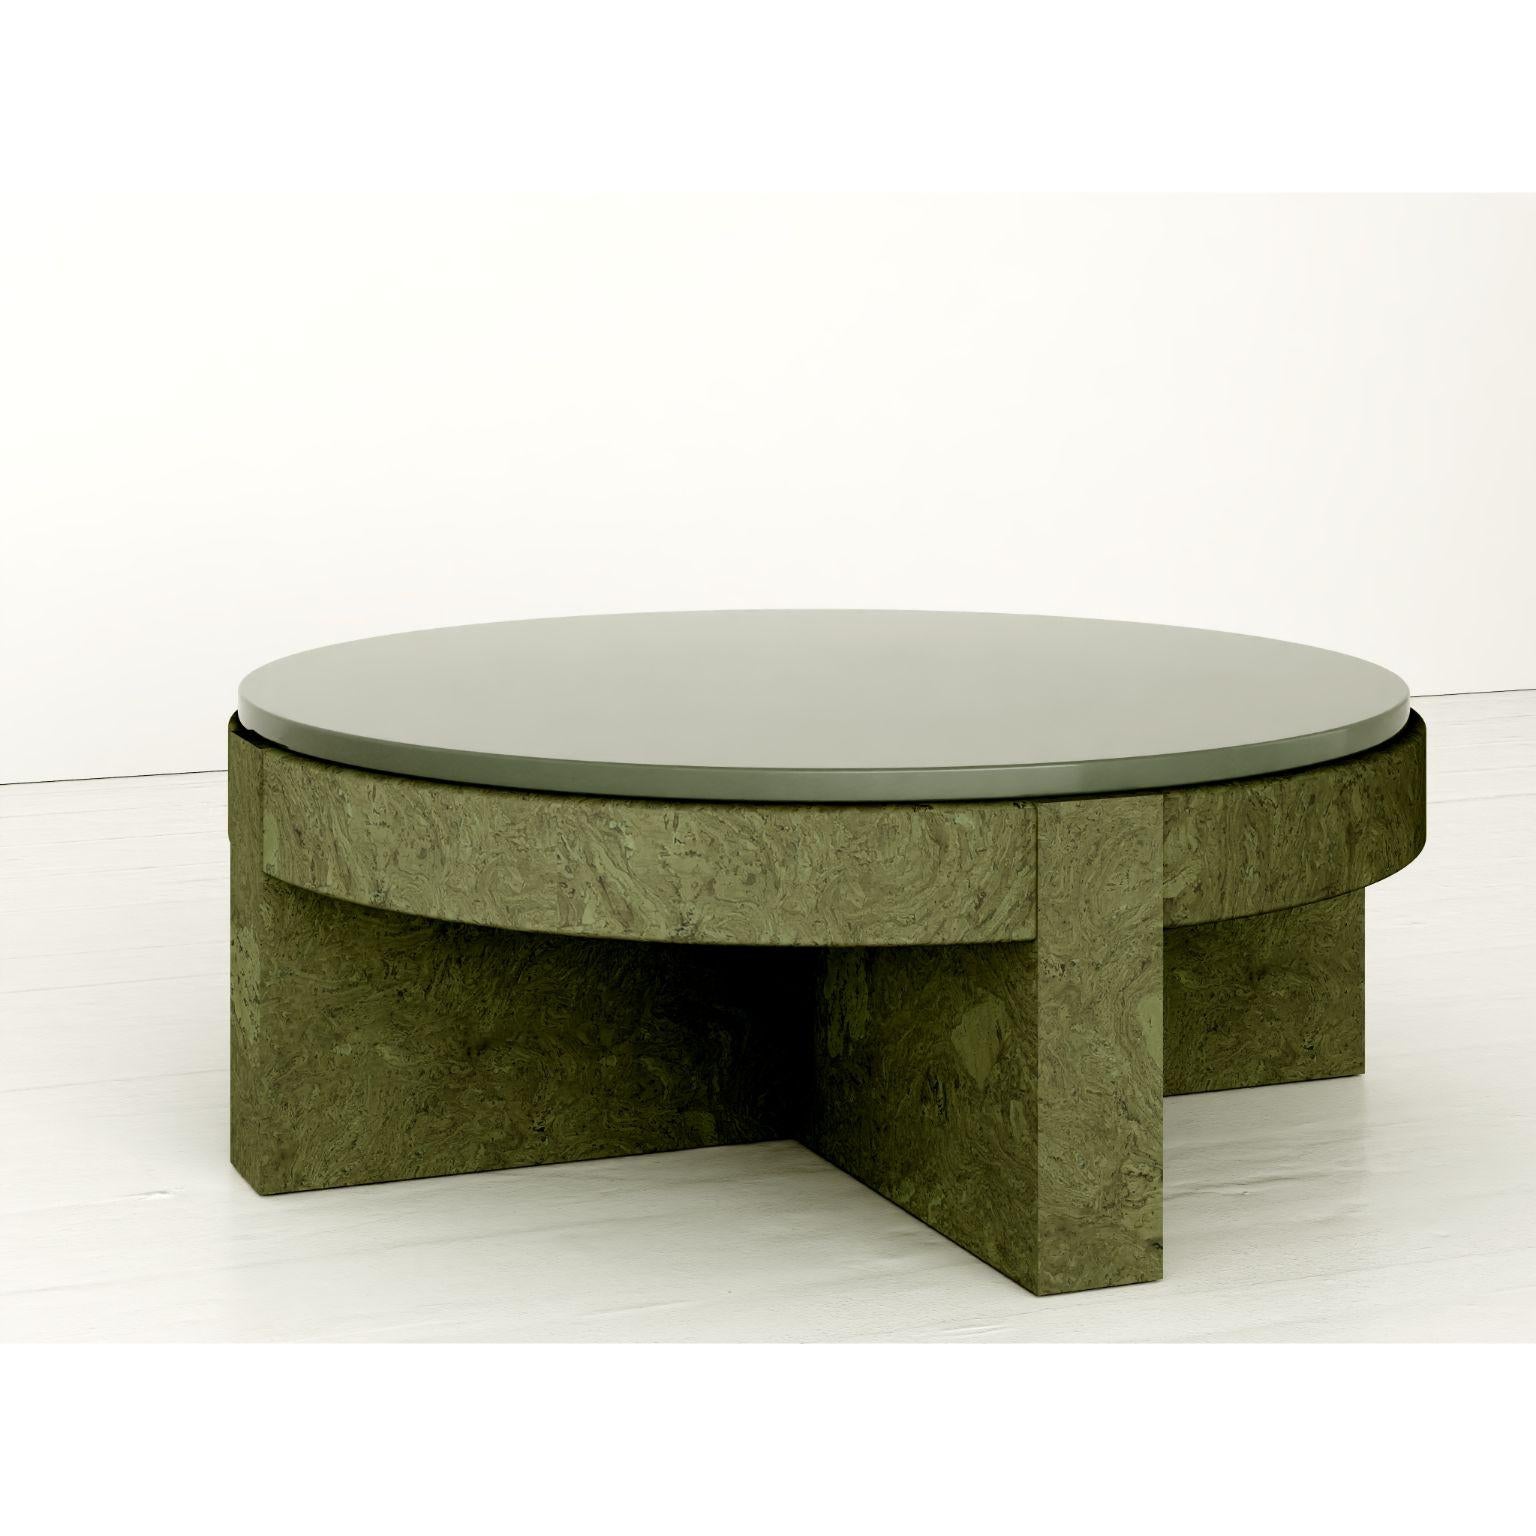 Object 08 Green Seating by Volta (Sonstiges) im Angebot